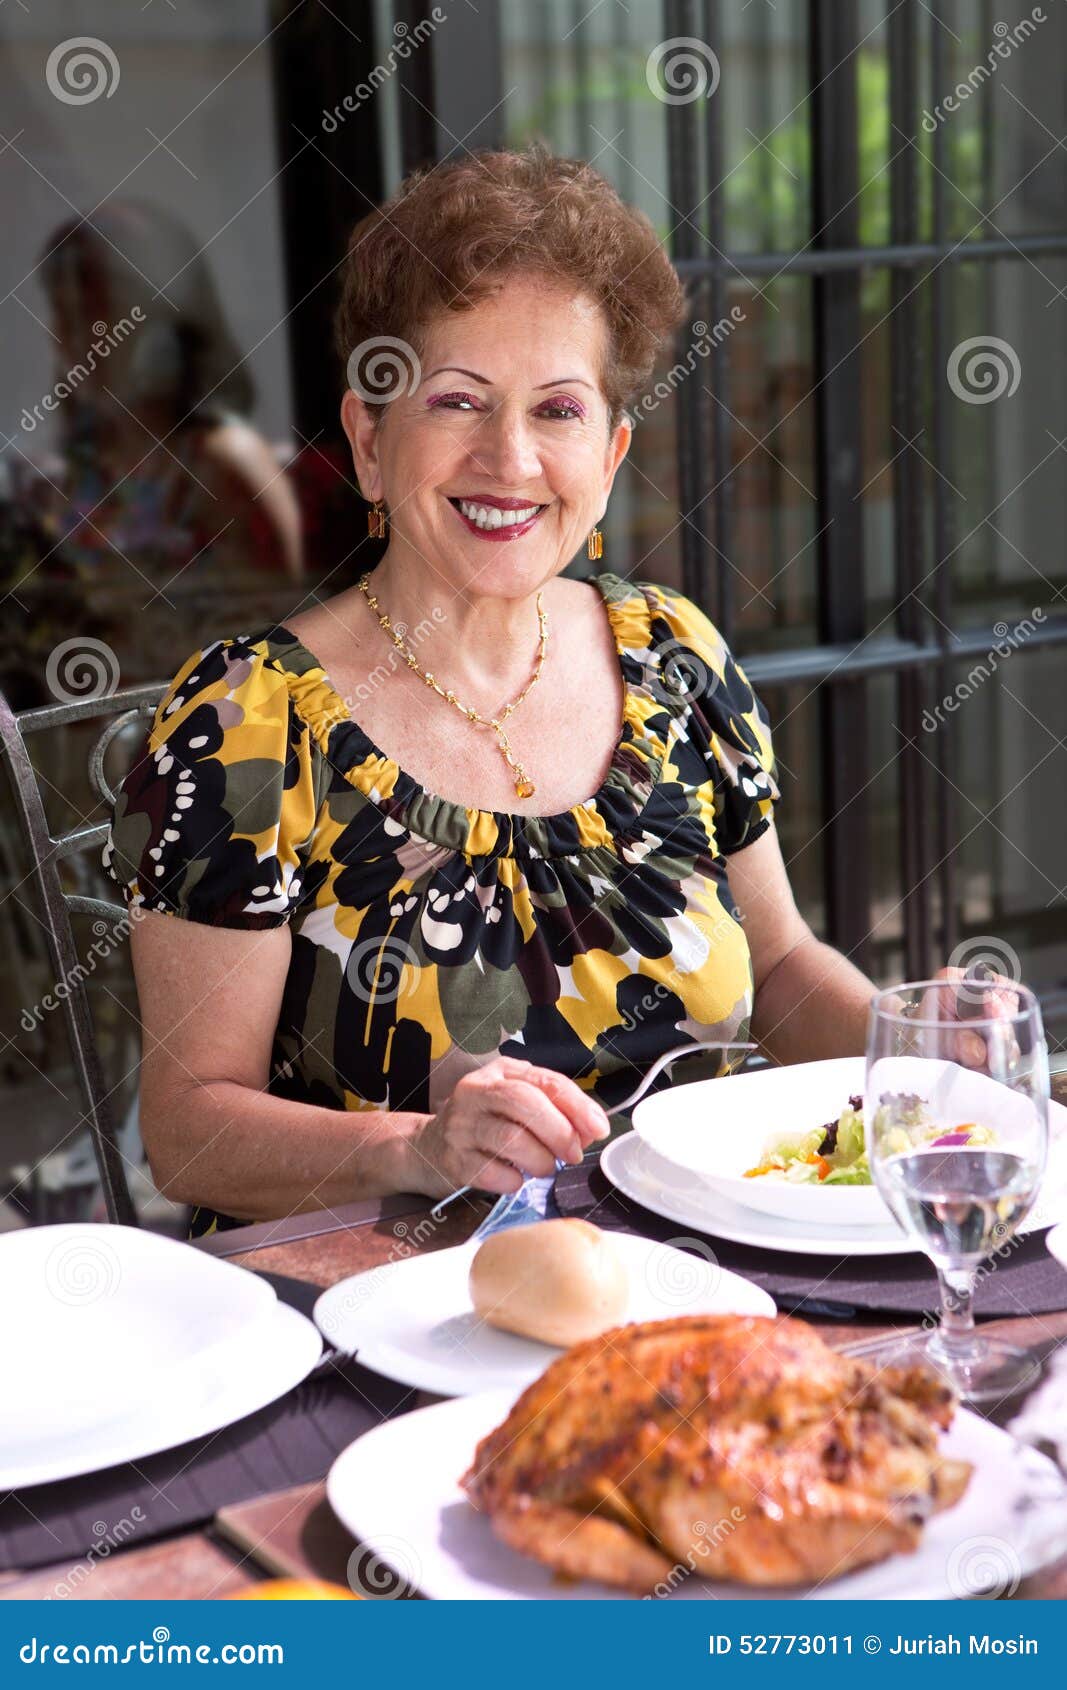 hispanic senior woman enjoying lunchtime outdoor in a home environment